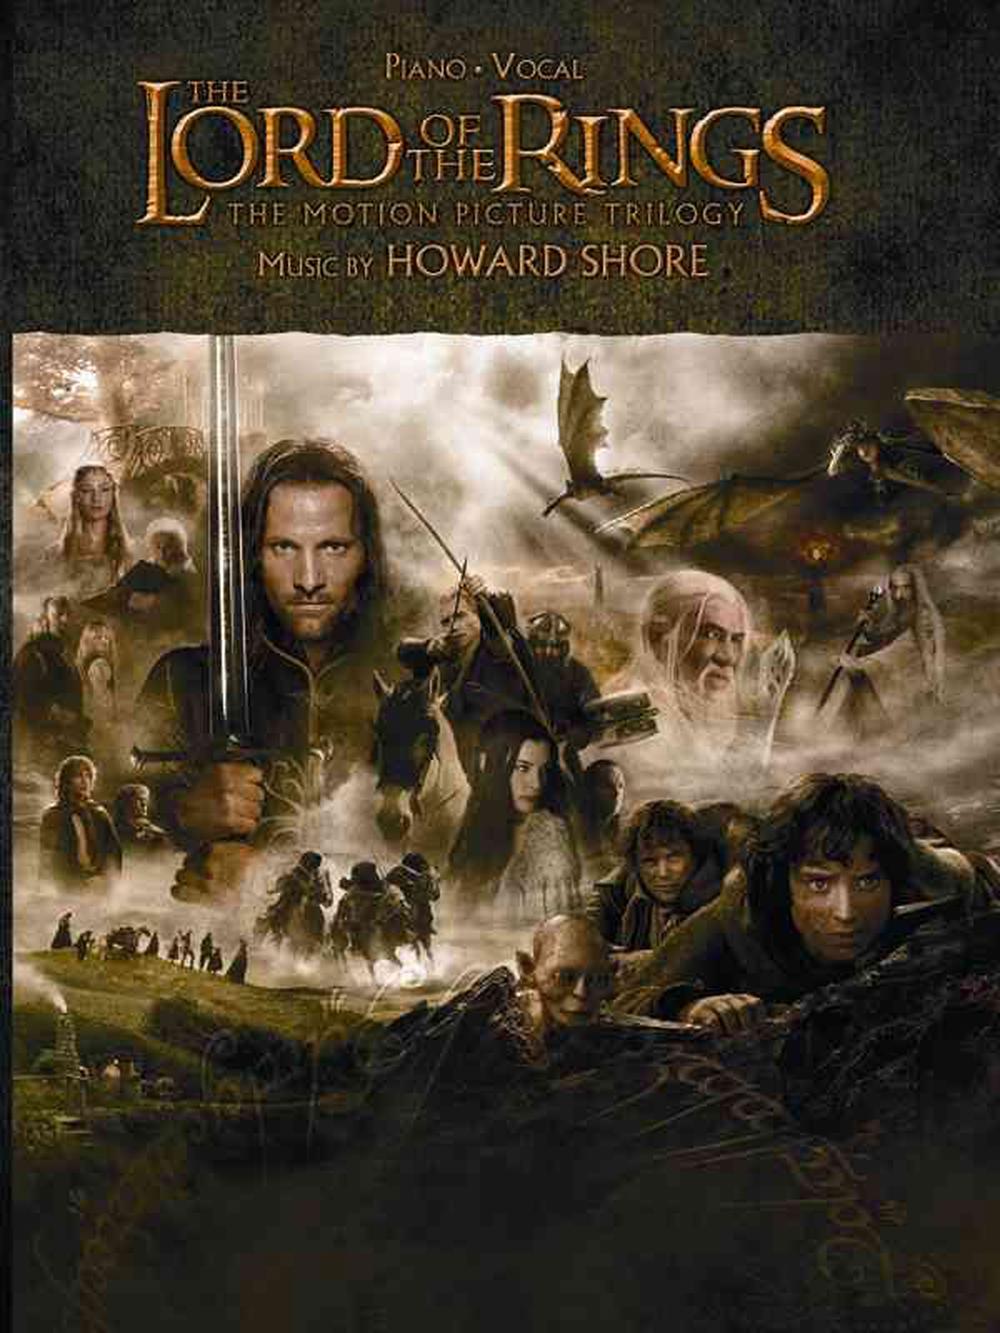 book review on lord of the rings